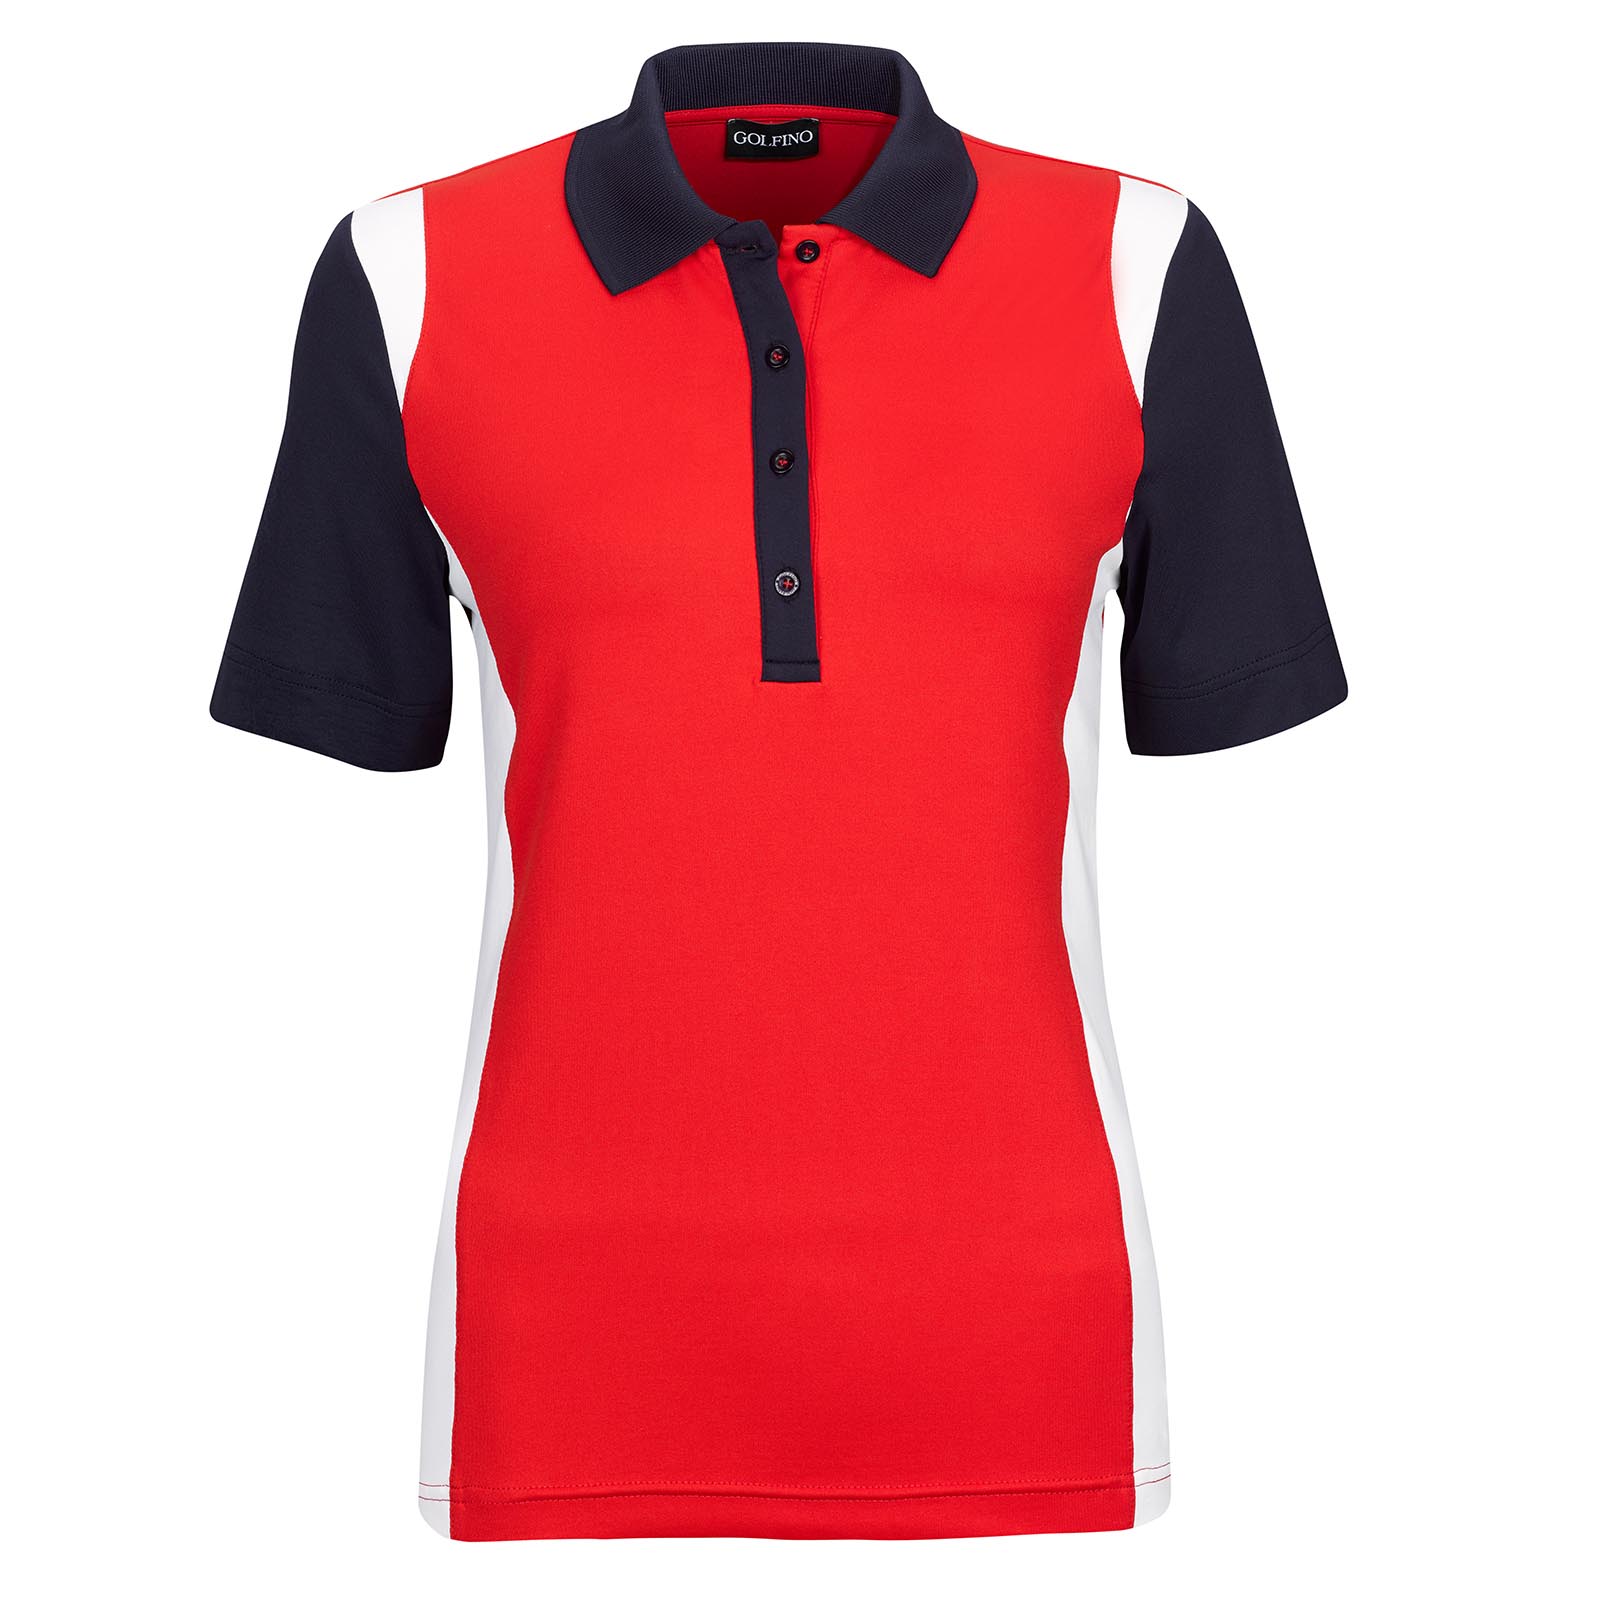 Short-sleeve Ladies' functional golf polo with Moisture Management in Pro Look